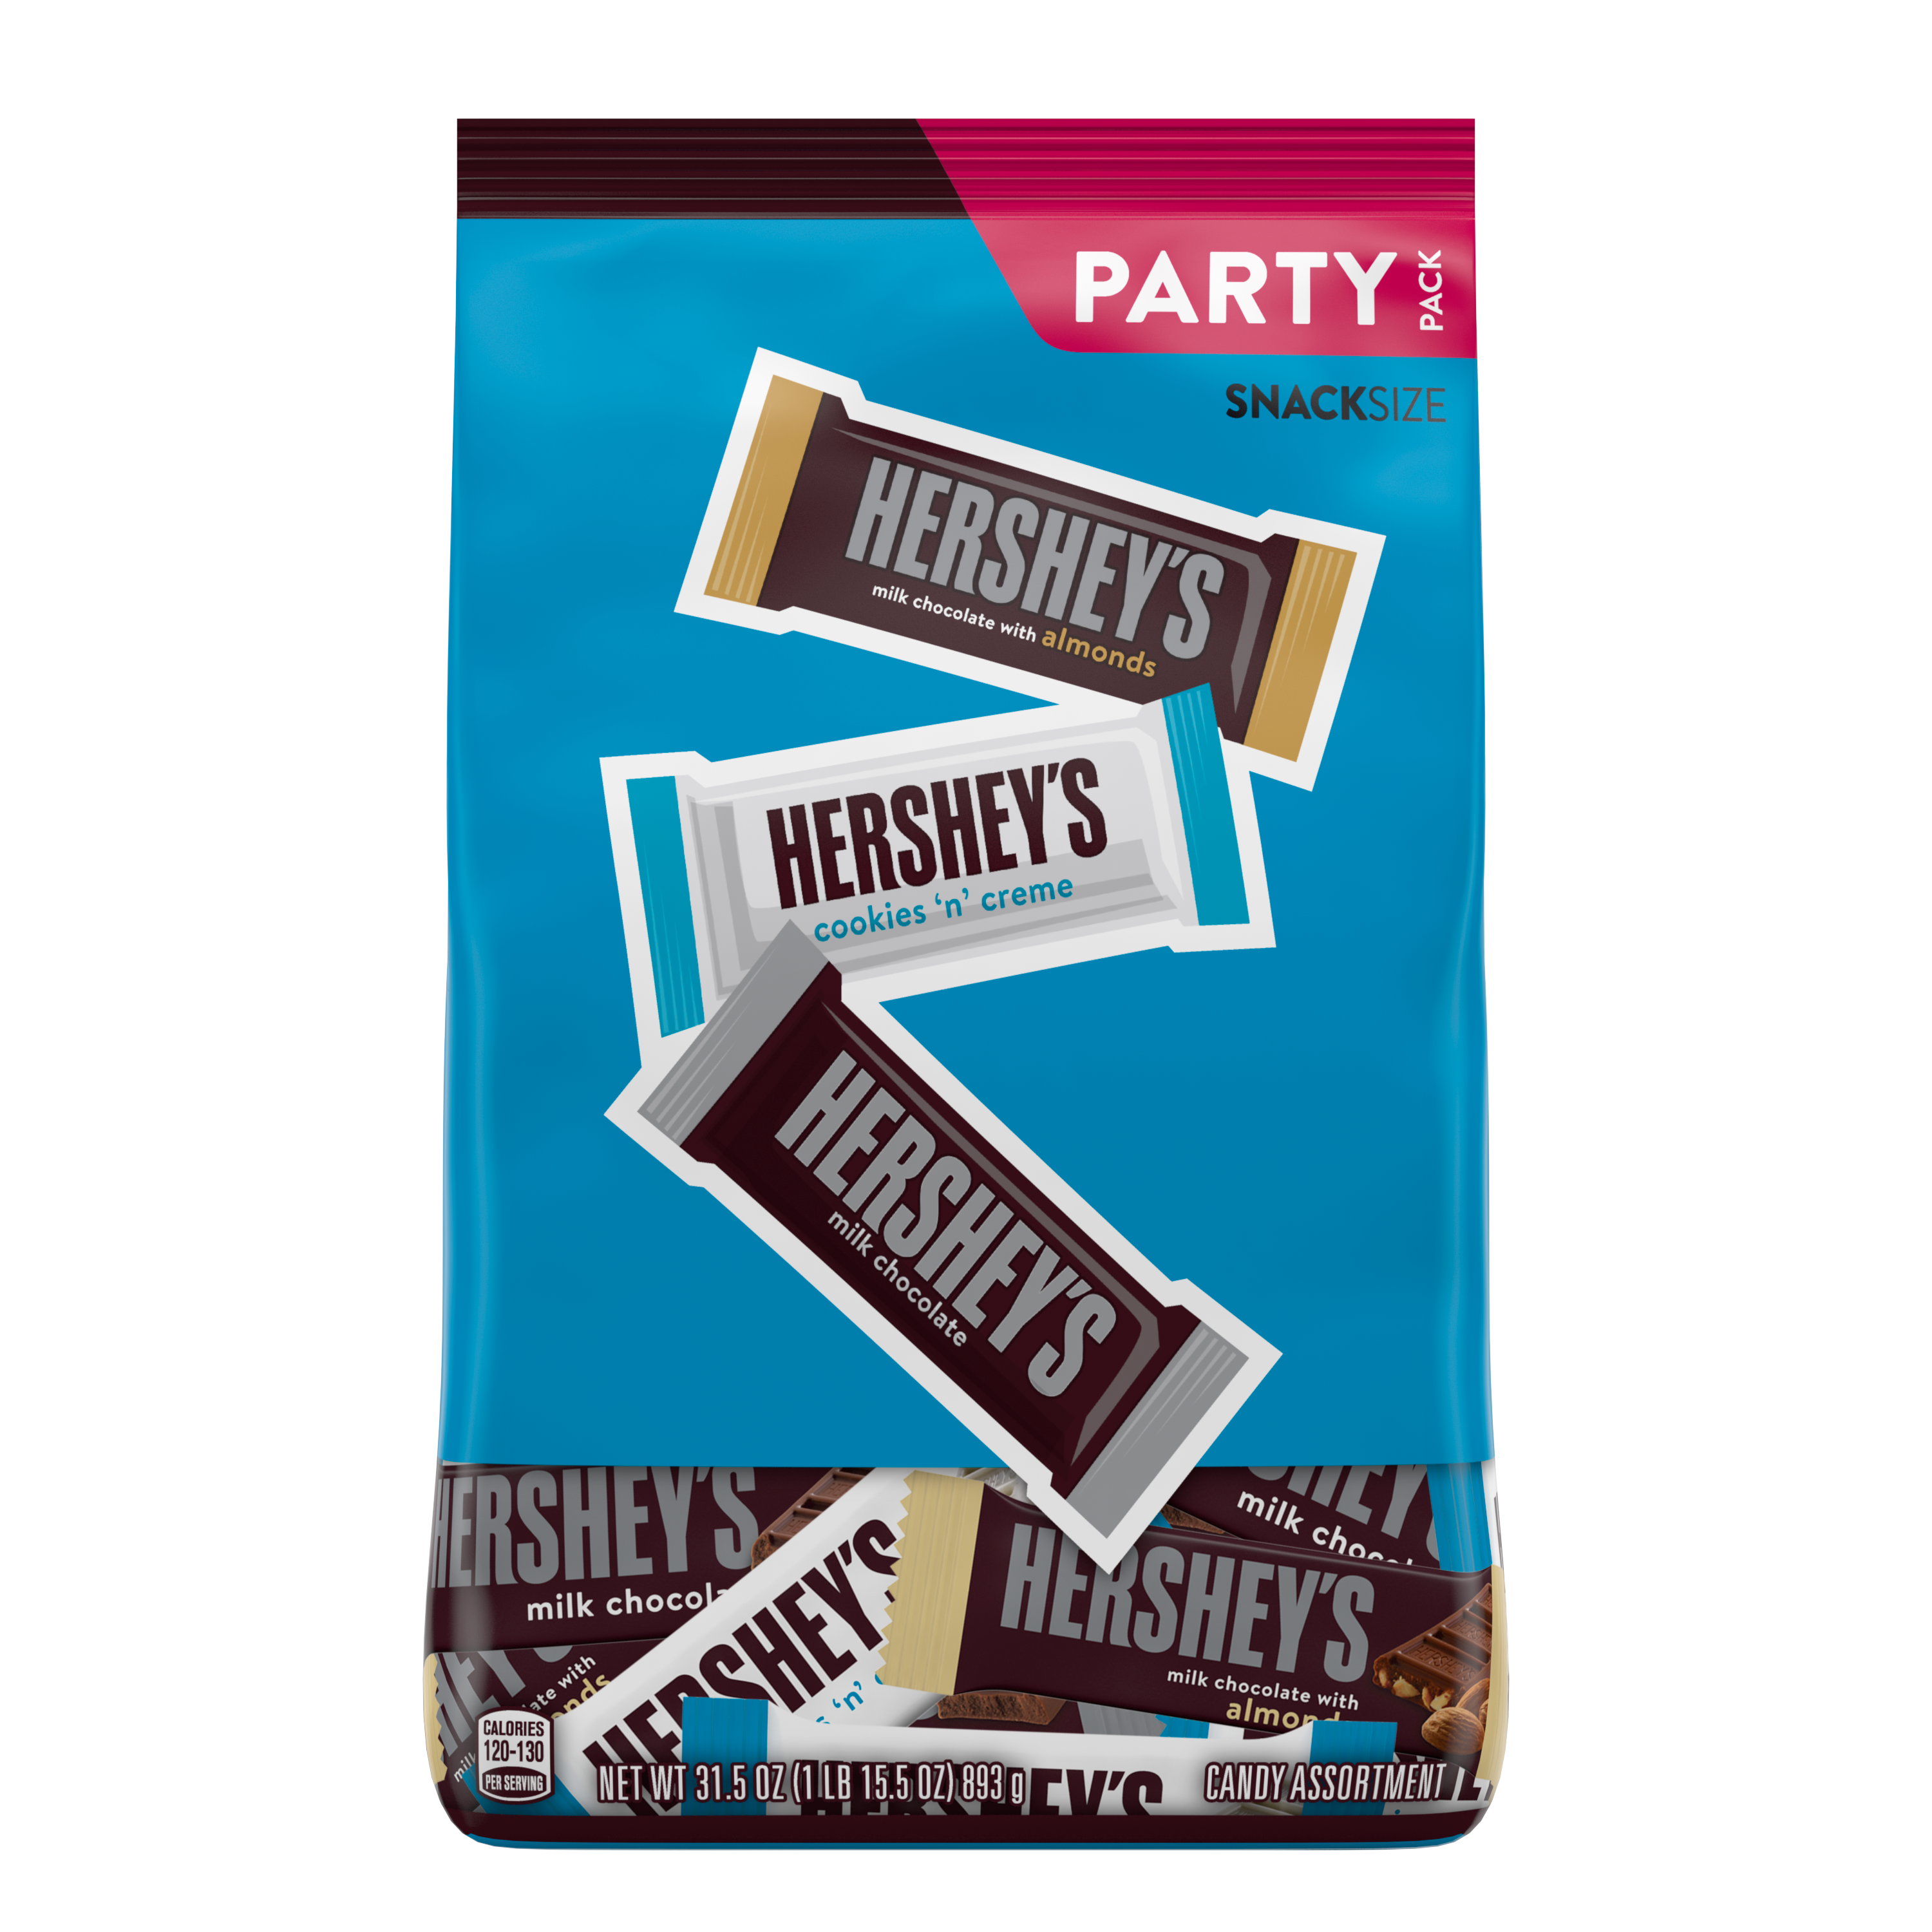 HERSHEY’S Snack Size Assortment, 31.5 oz bag - Front of Package